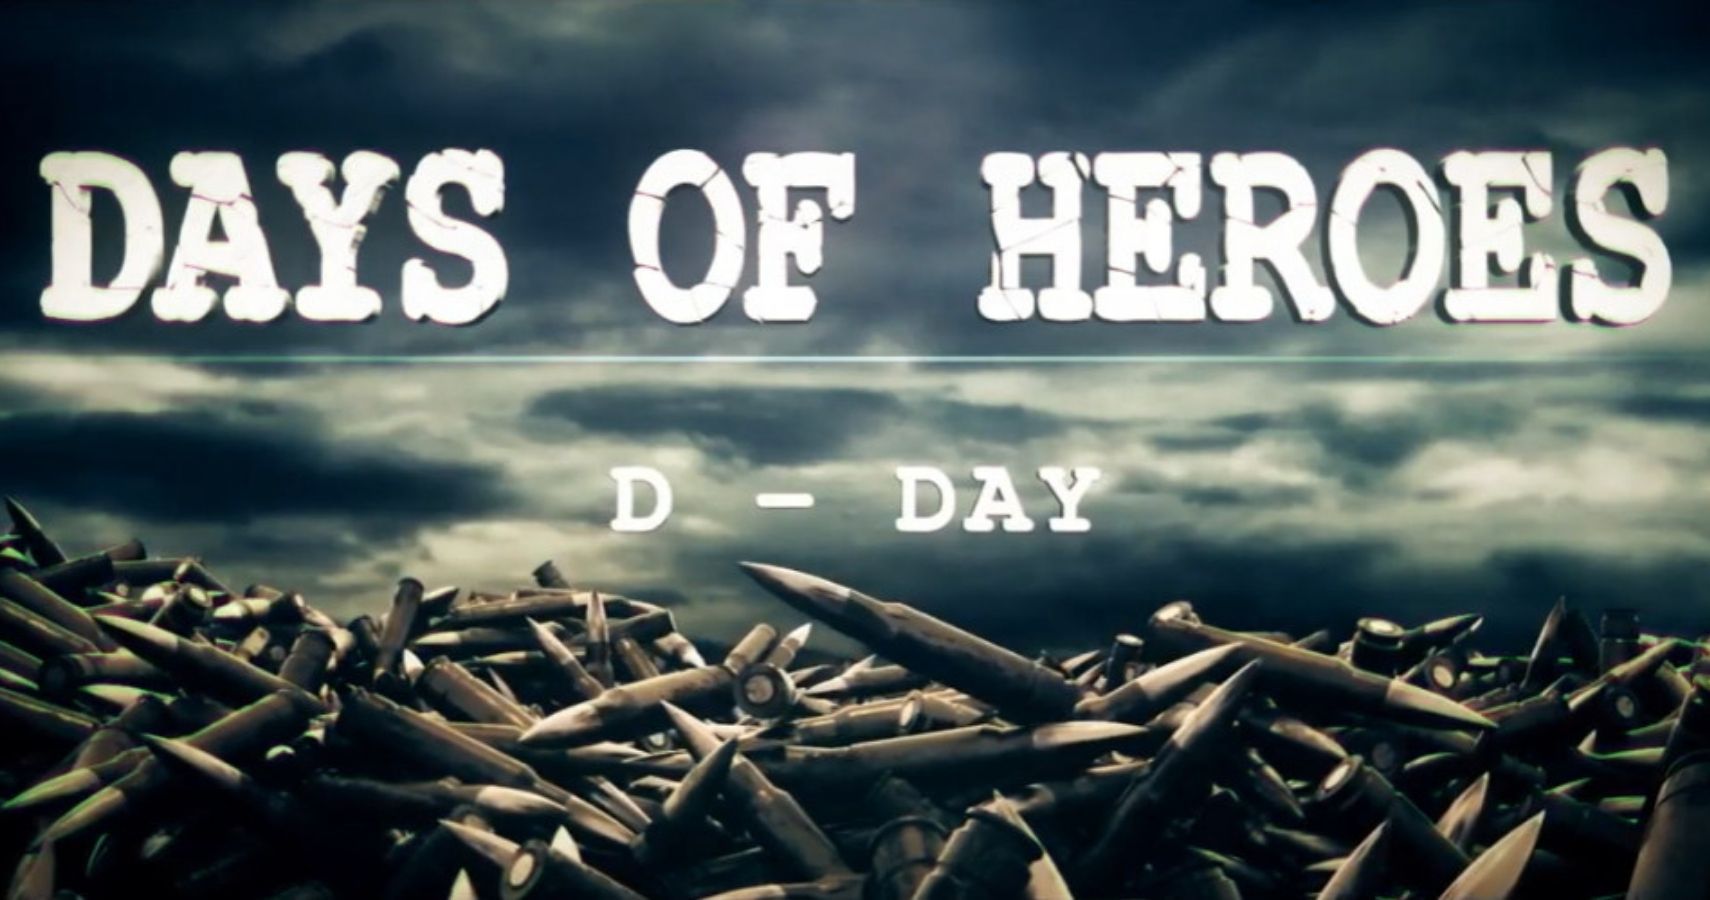 Days of Heroes D-Day VR Announcement feature image